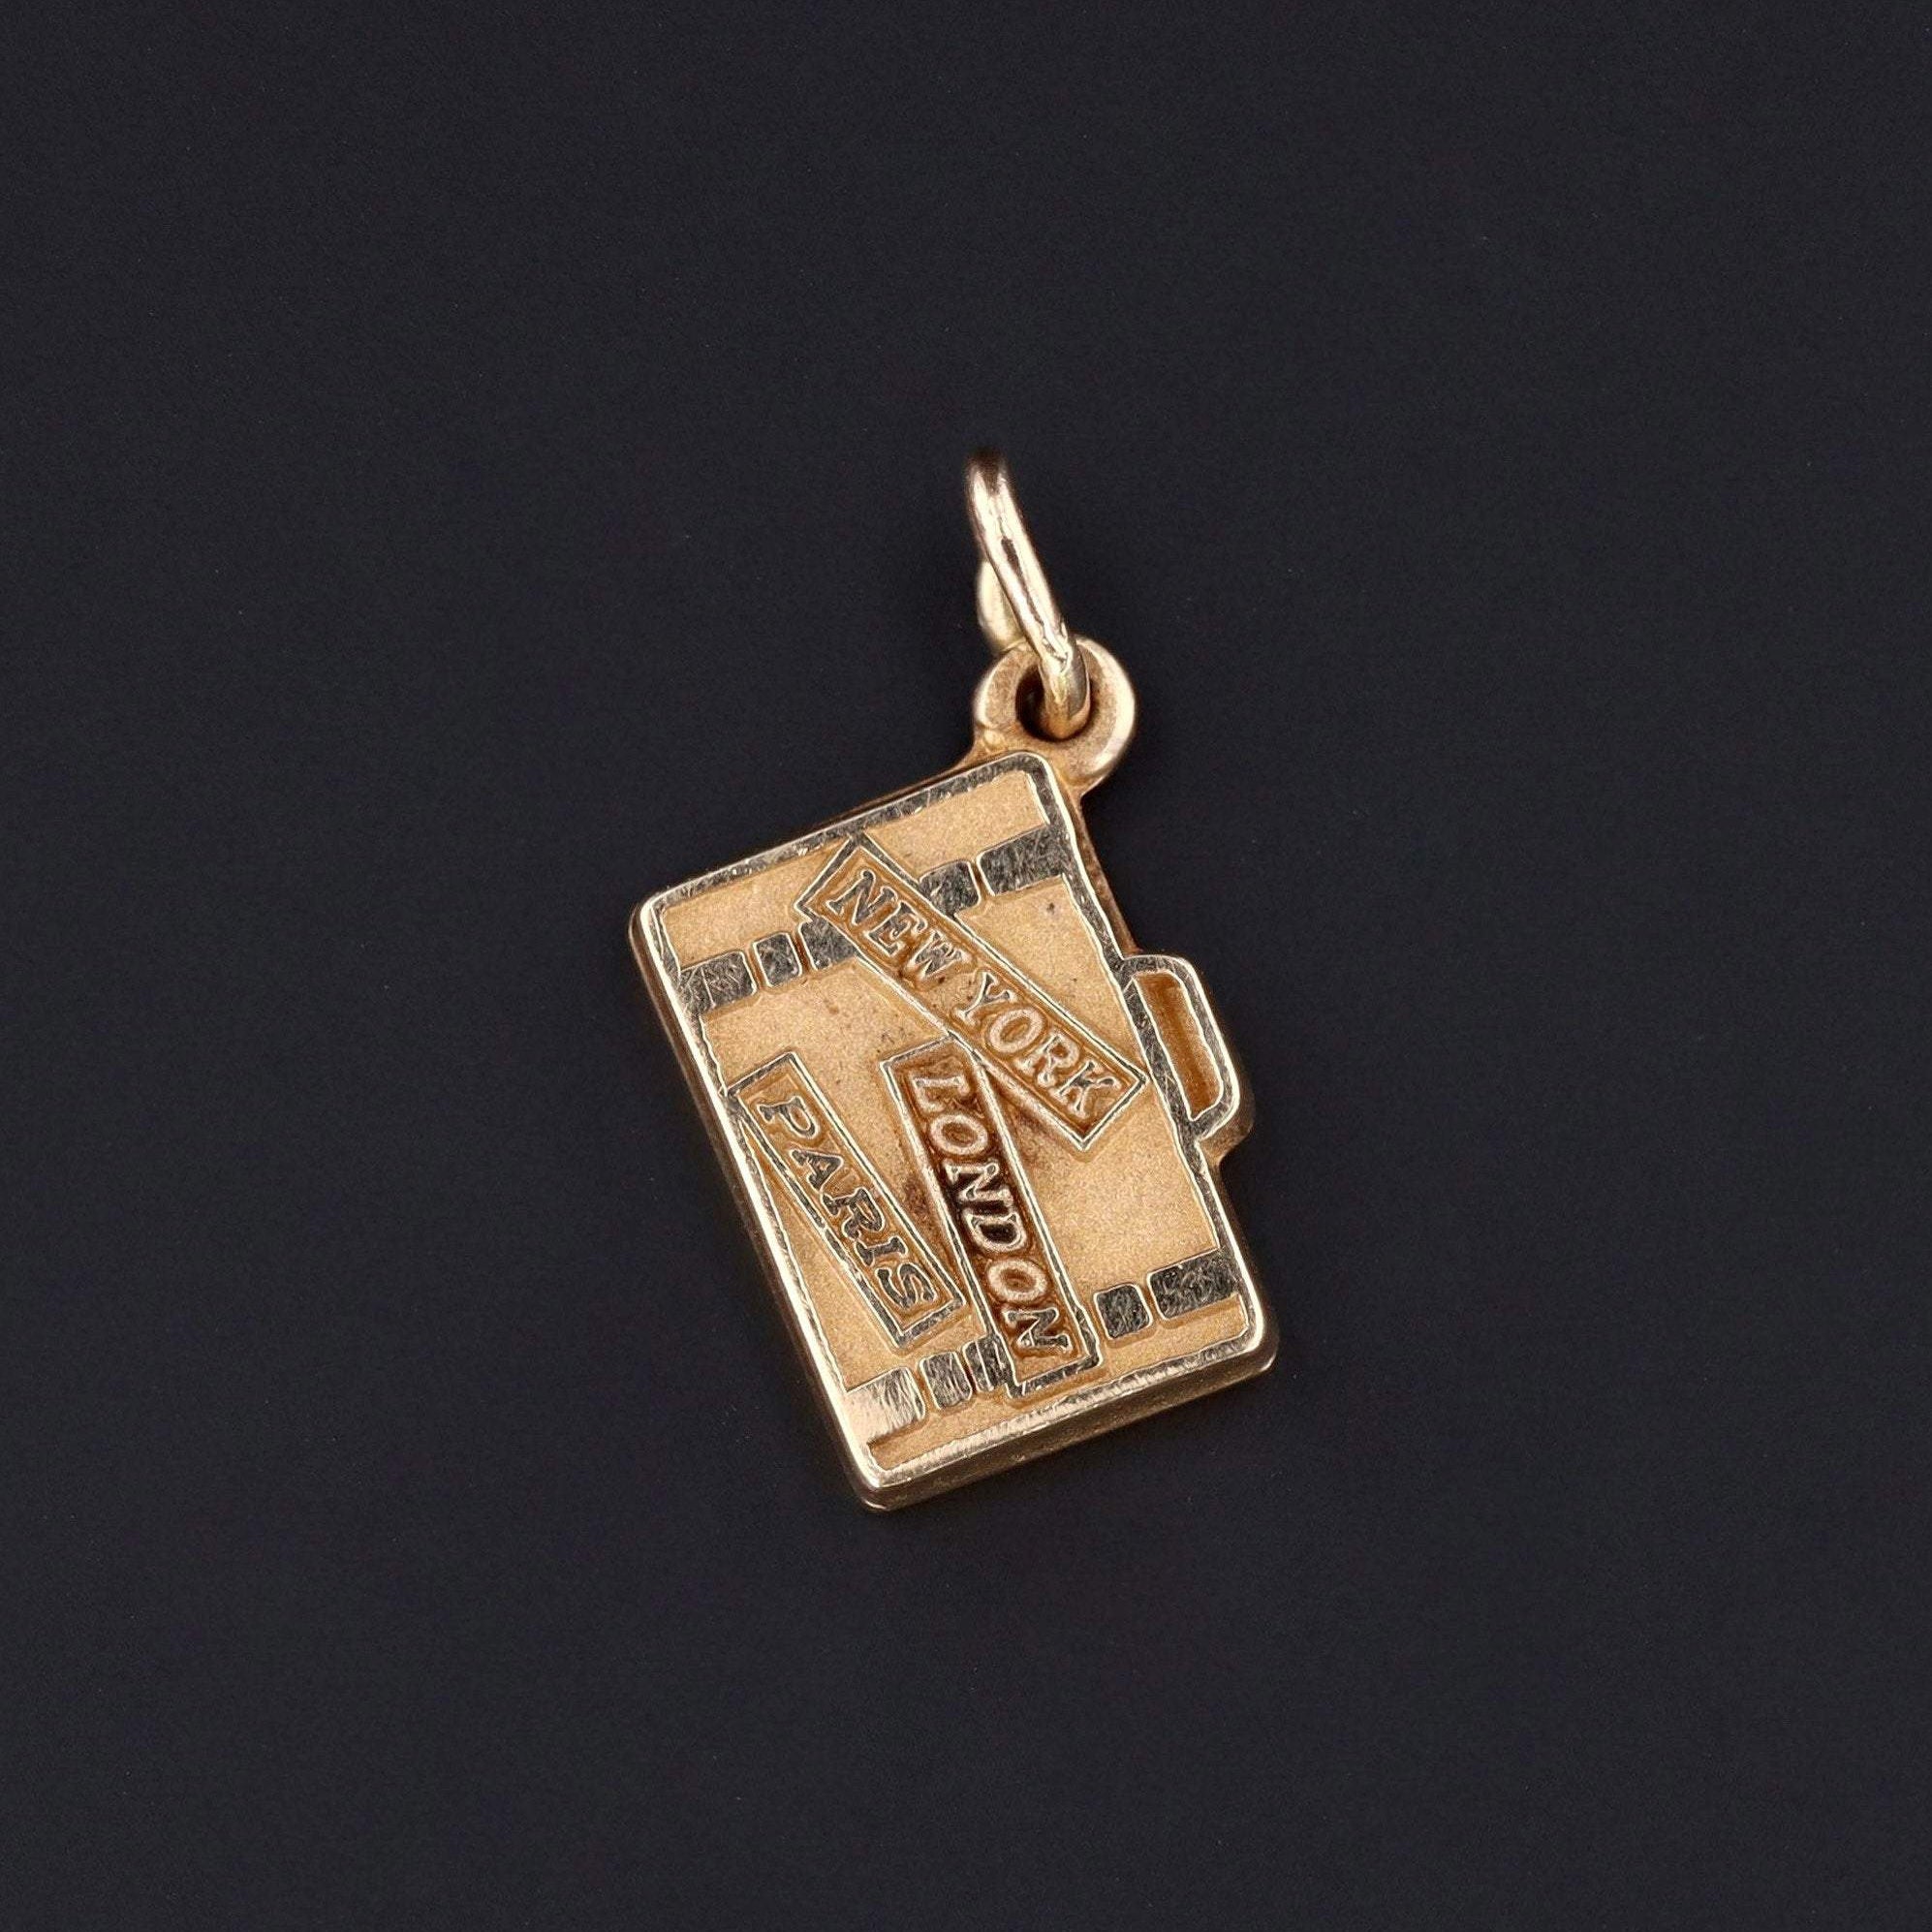 Gold Suitcase Charm | Vintage Gold Suitcase Charm | 14k Gold Suitcase Pendant | Gift for Traveler